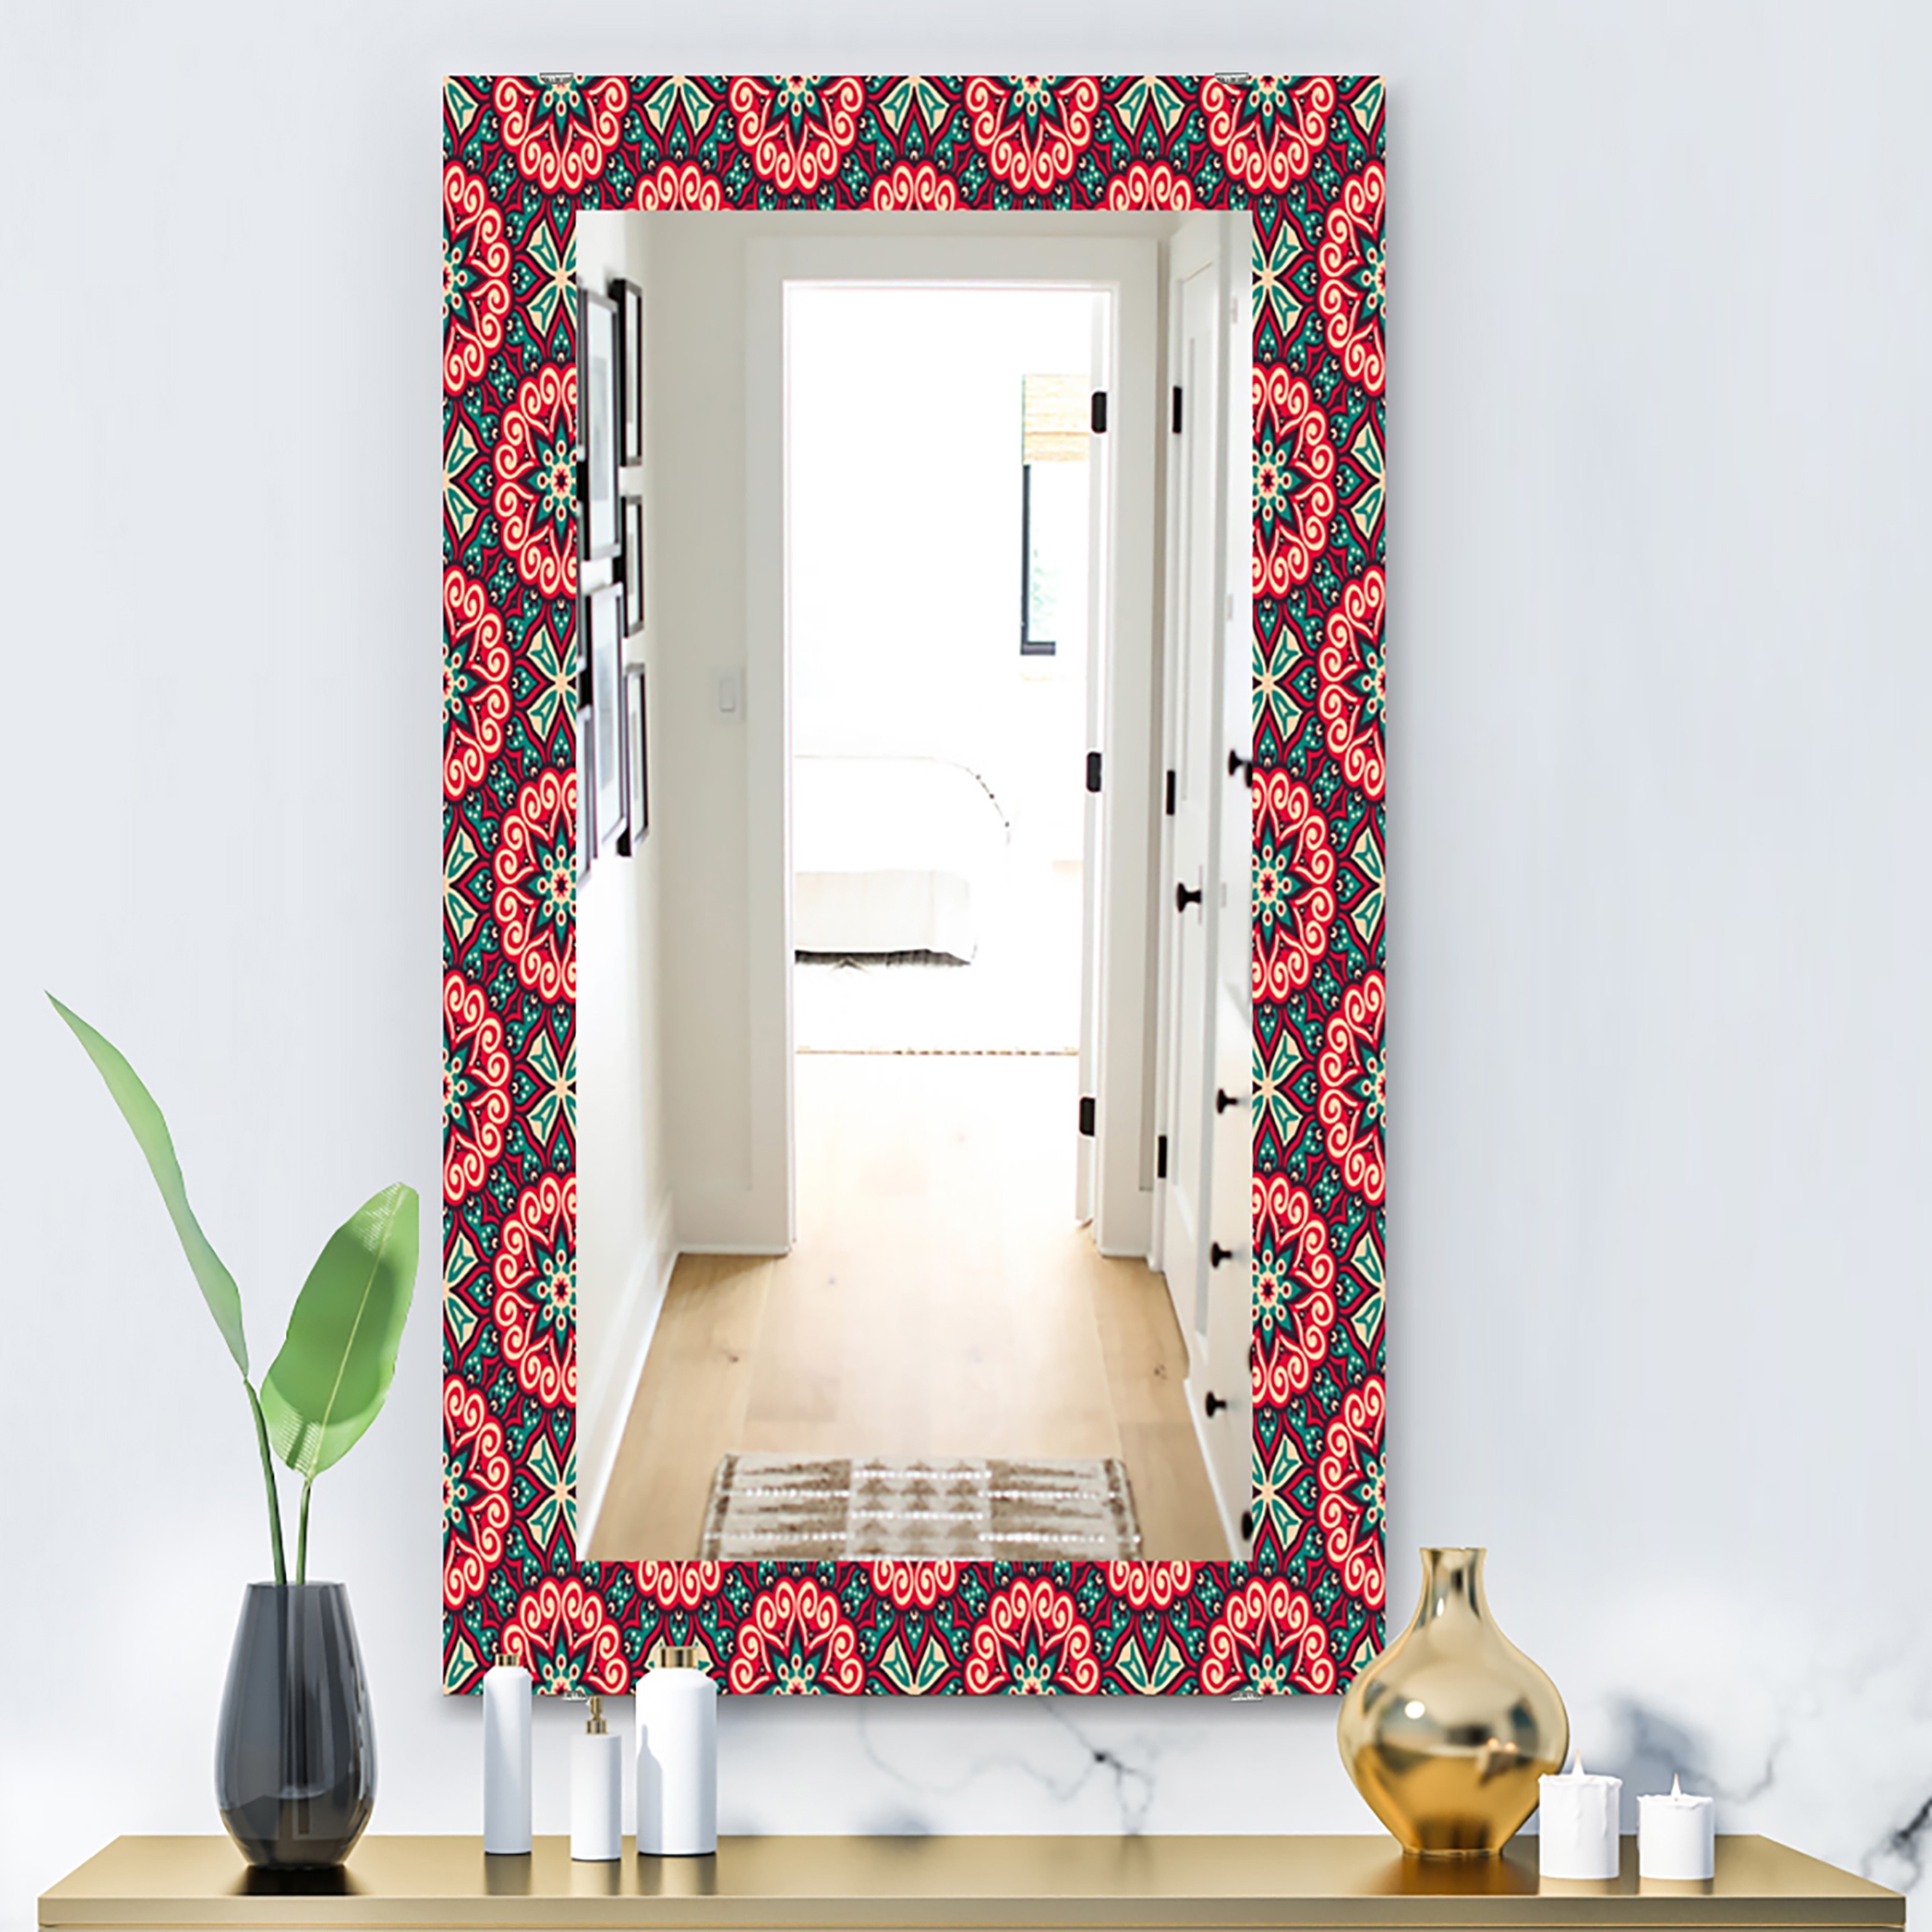 Mirrors as decorative elements